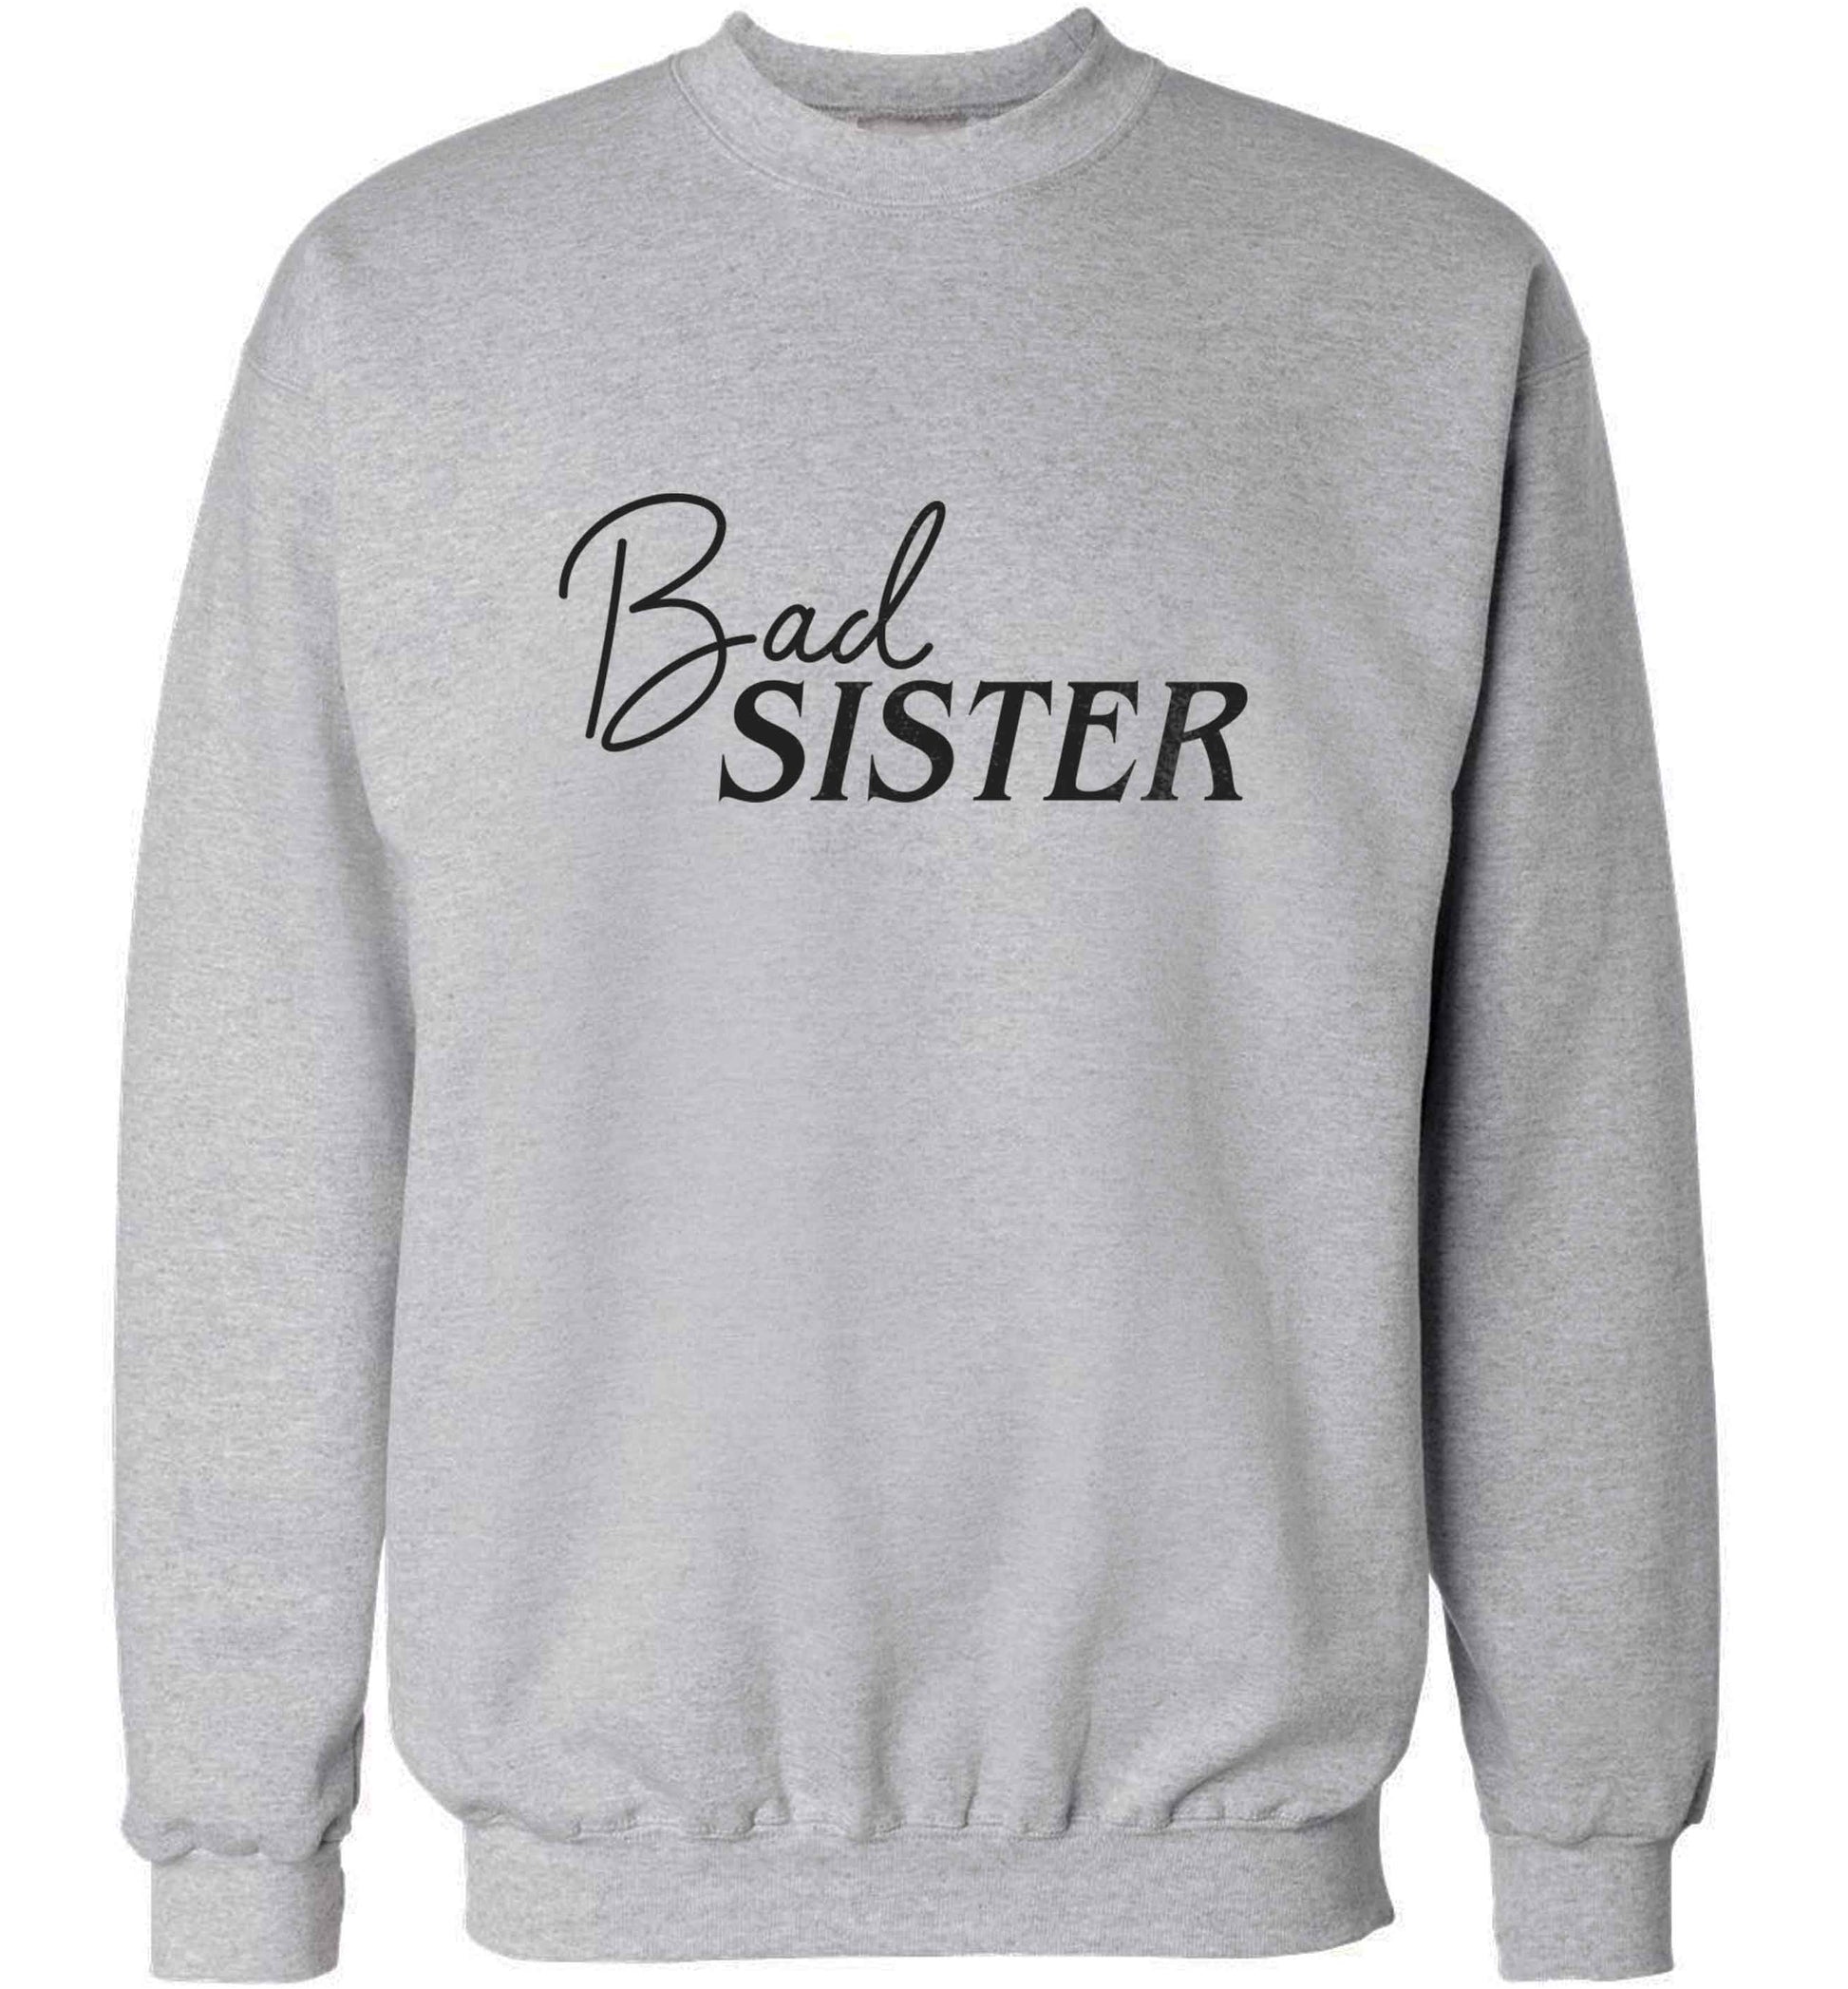 Bad sister adult's unisex grey sweater 2XL